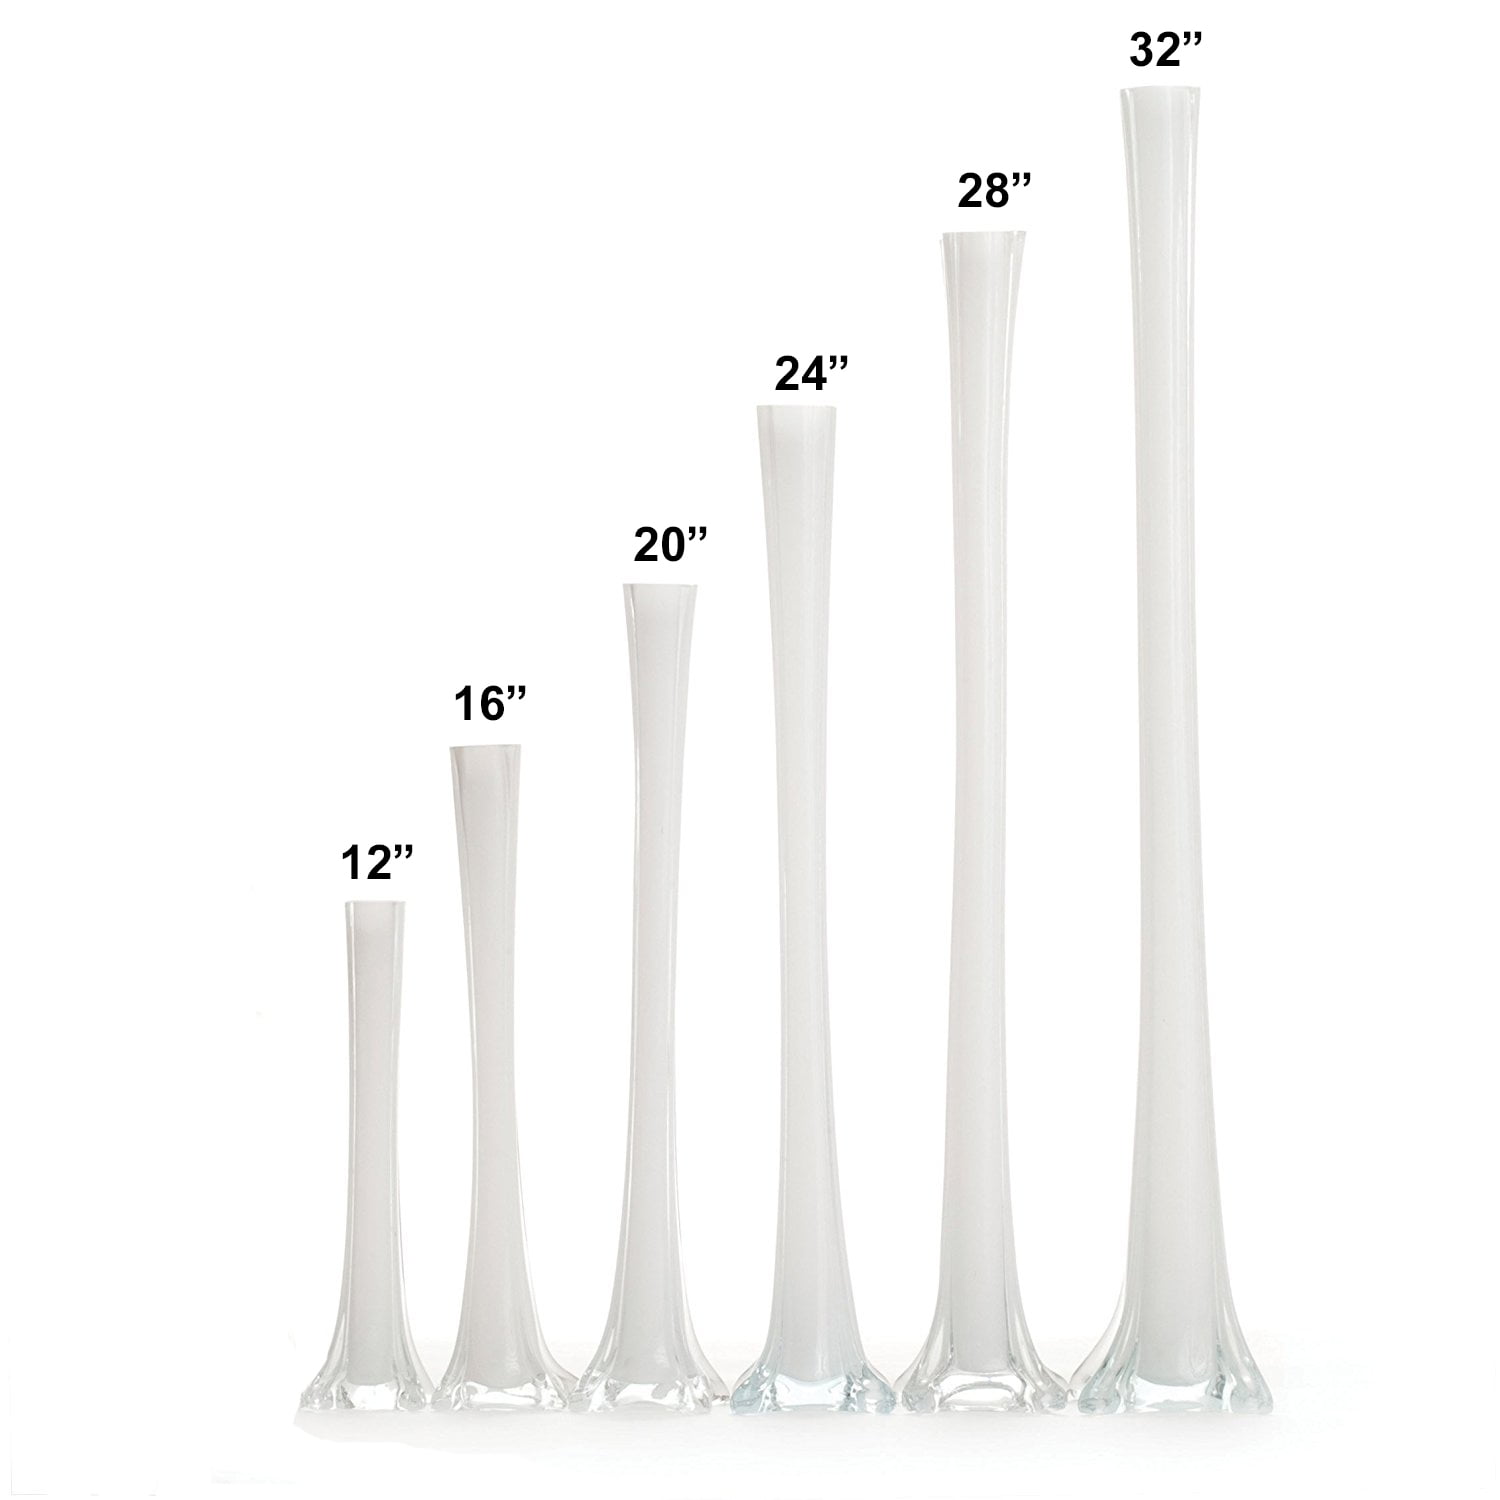 Set of 12 pieces 24 Inches Tall Glass Eiffel Tower Vases for Centerpieces,  Flowers, Decorations, and Gifts (12 pieces - White)